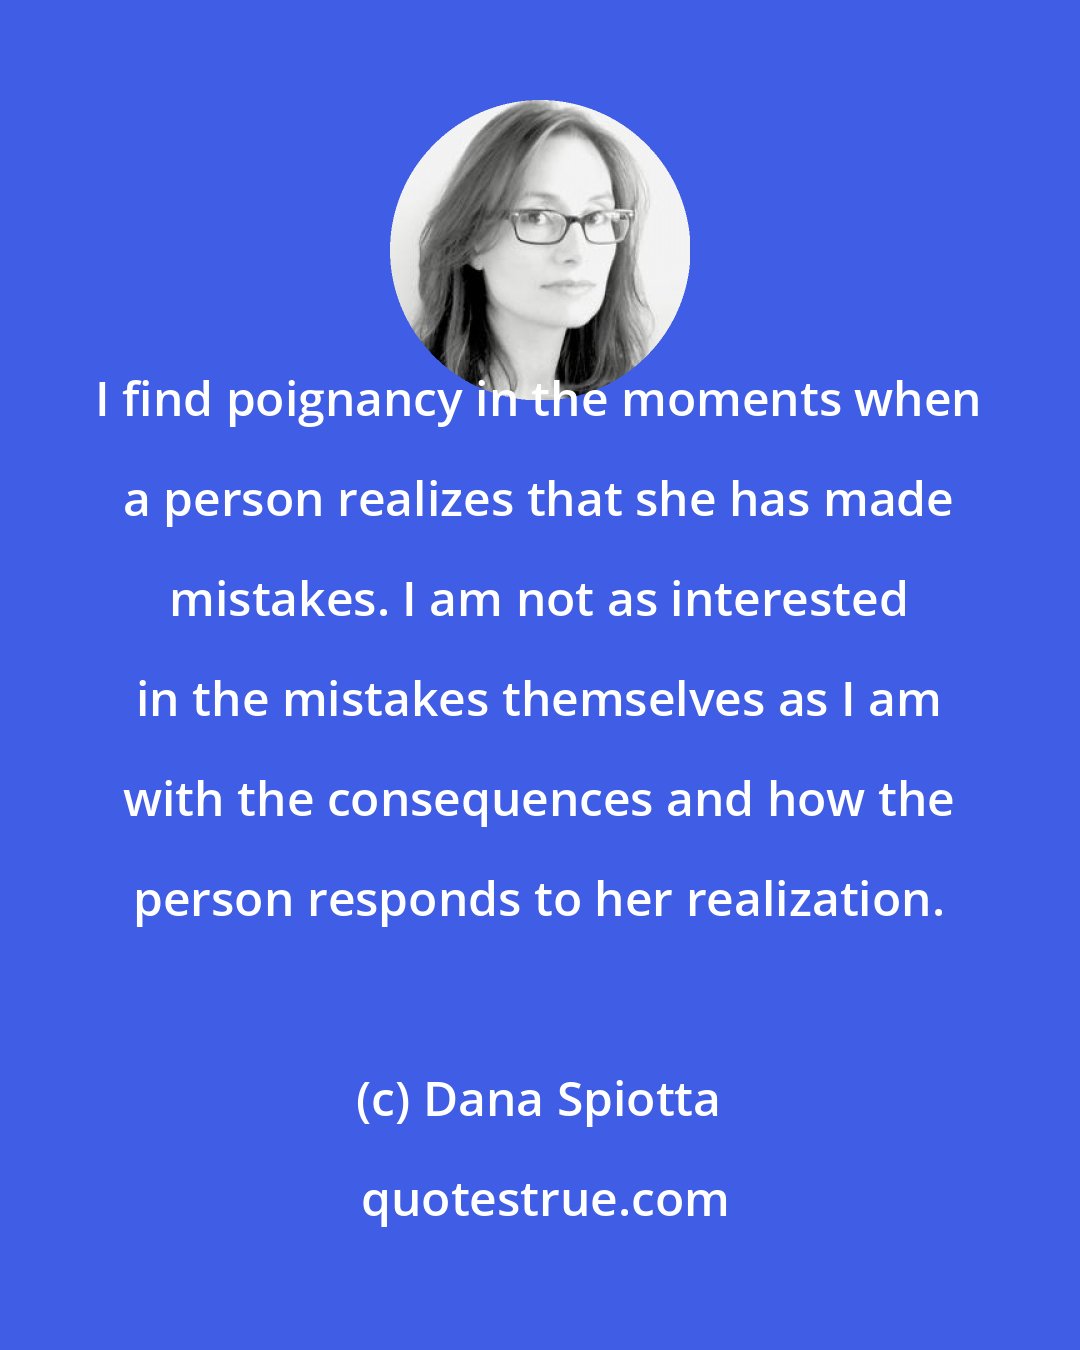 Dana Spiotta: I find poignancy in the moments when a person realizes that she has made mistakes. I am not as interested in the mistakes themselves as I am with the consequences and how the person responds to her realization.